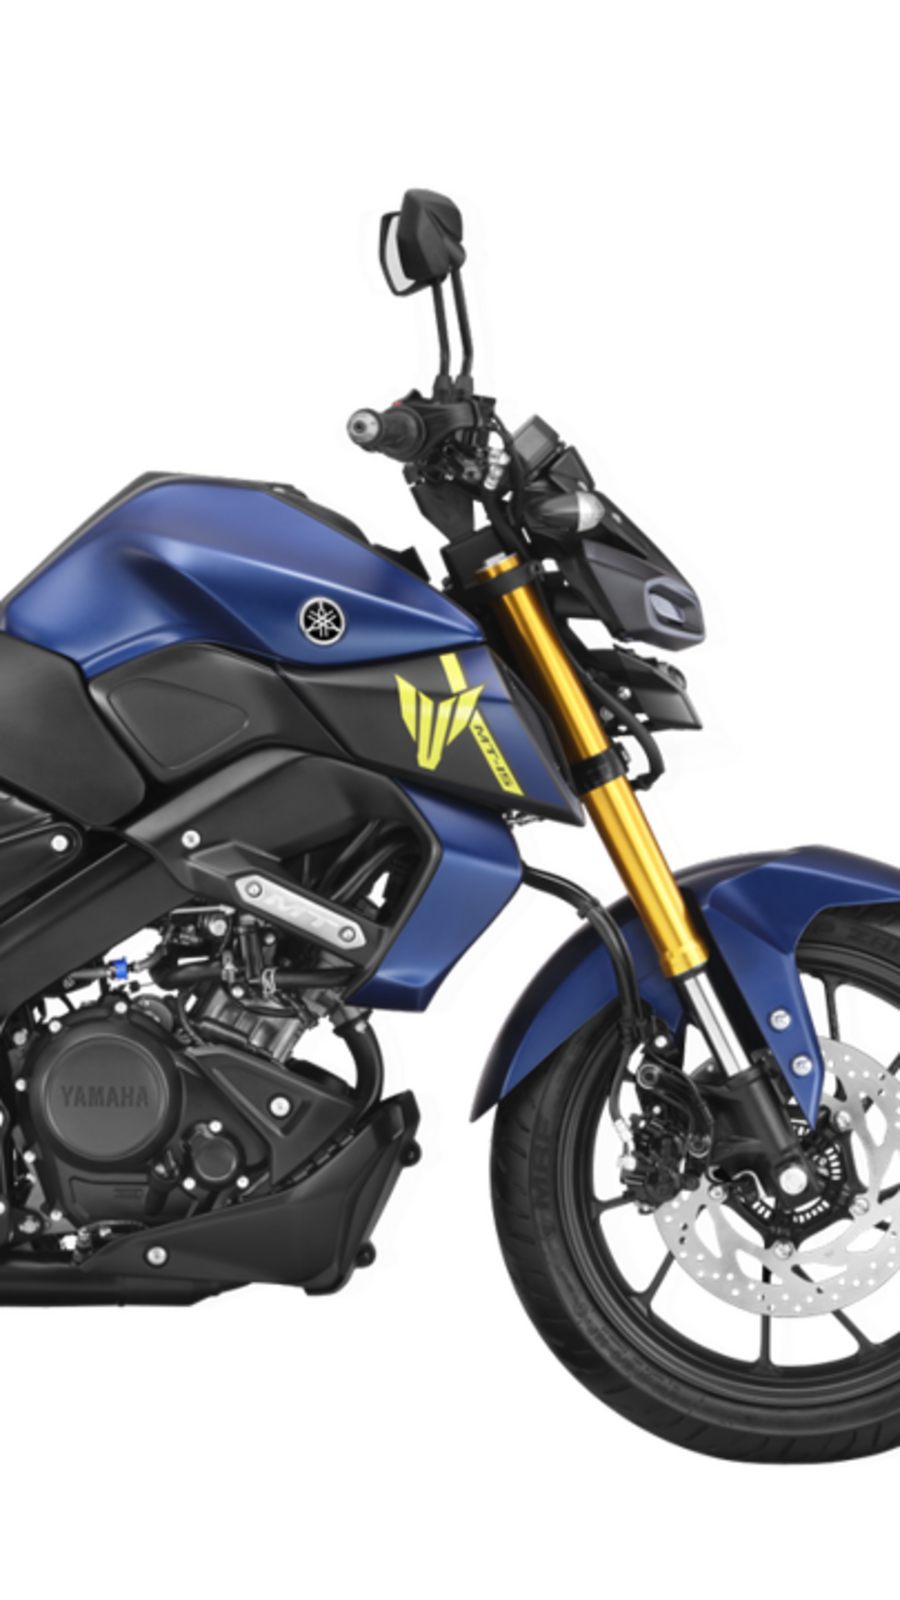 Book MT-15 Ver 2.0 Bike Online | Check MT-15 Ver 2.0 Price, Colour and  Special Features- Yamaha e-shop